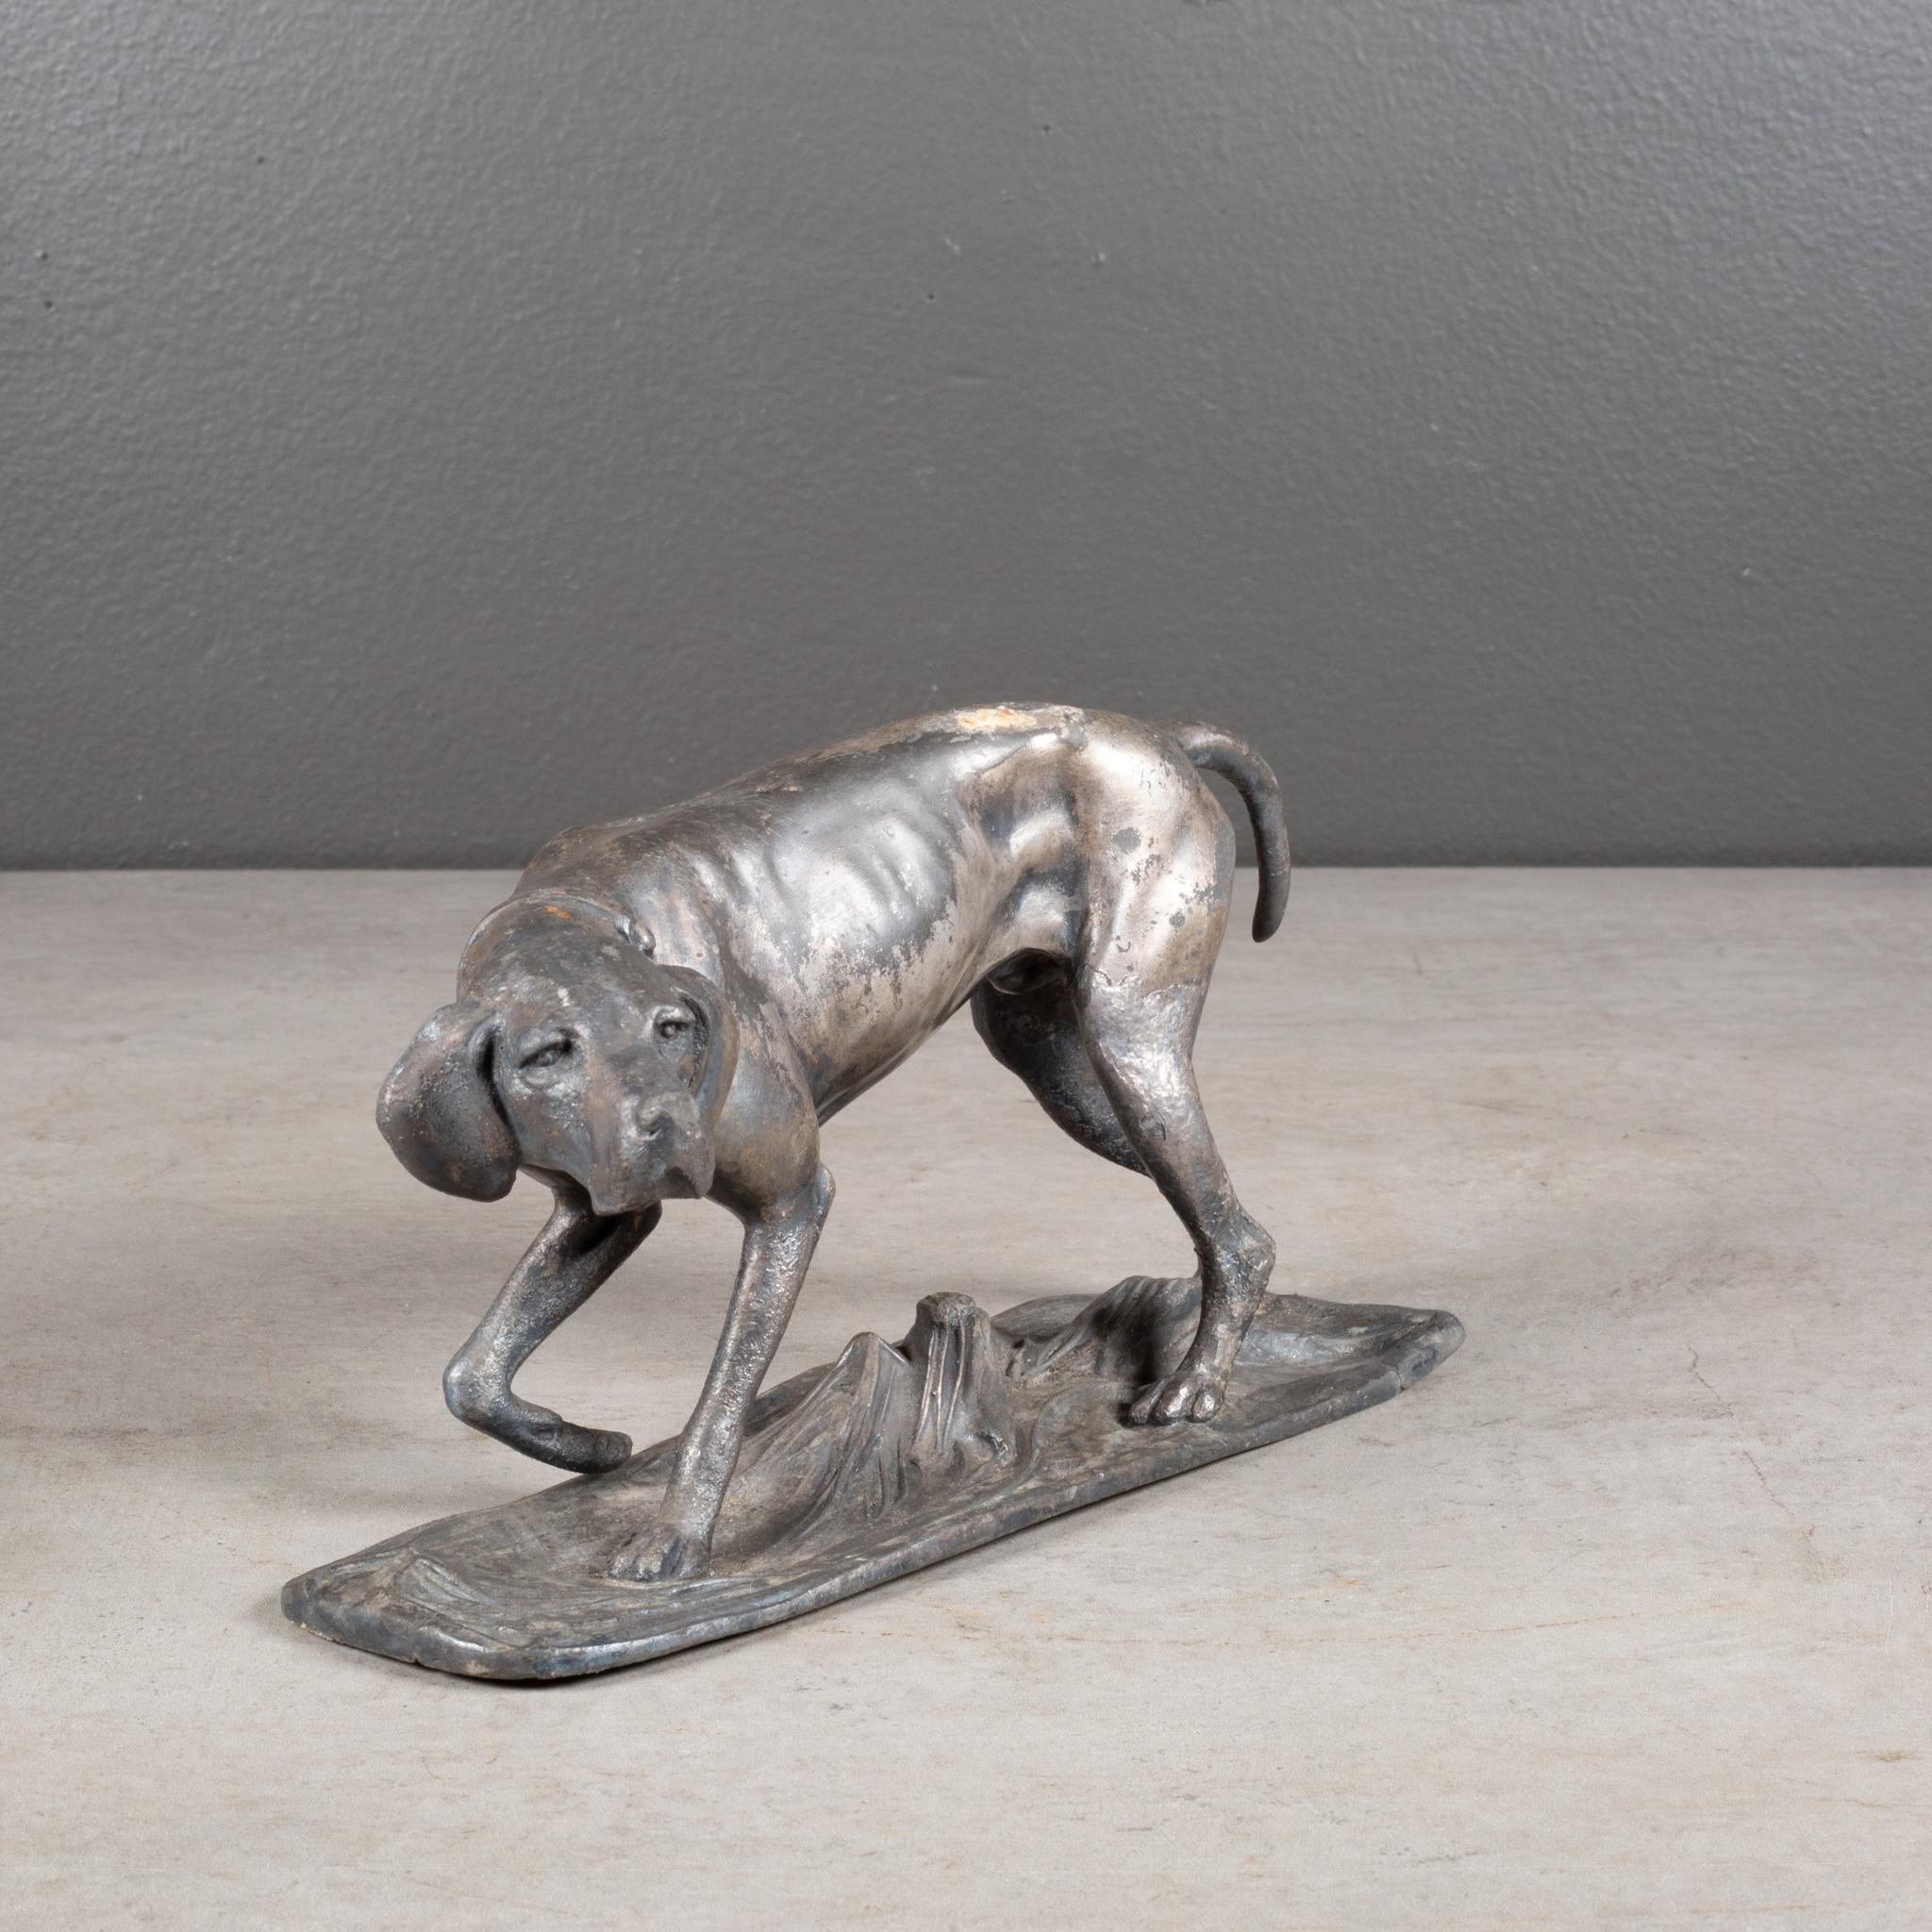 ABOUT

A vintage patinated, pewter Pointer Dog sculpture.

    CREATOR Unknown.
    DATE OF MANUFACTURE c.1940-1960.
    MATERIALS AND TECHNIQUES Pewter.
    CONDITION Good. Wear consistent with age and use.
    DIMENSIONS H 4 in. x W 7.5 in. x D 3